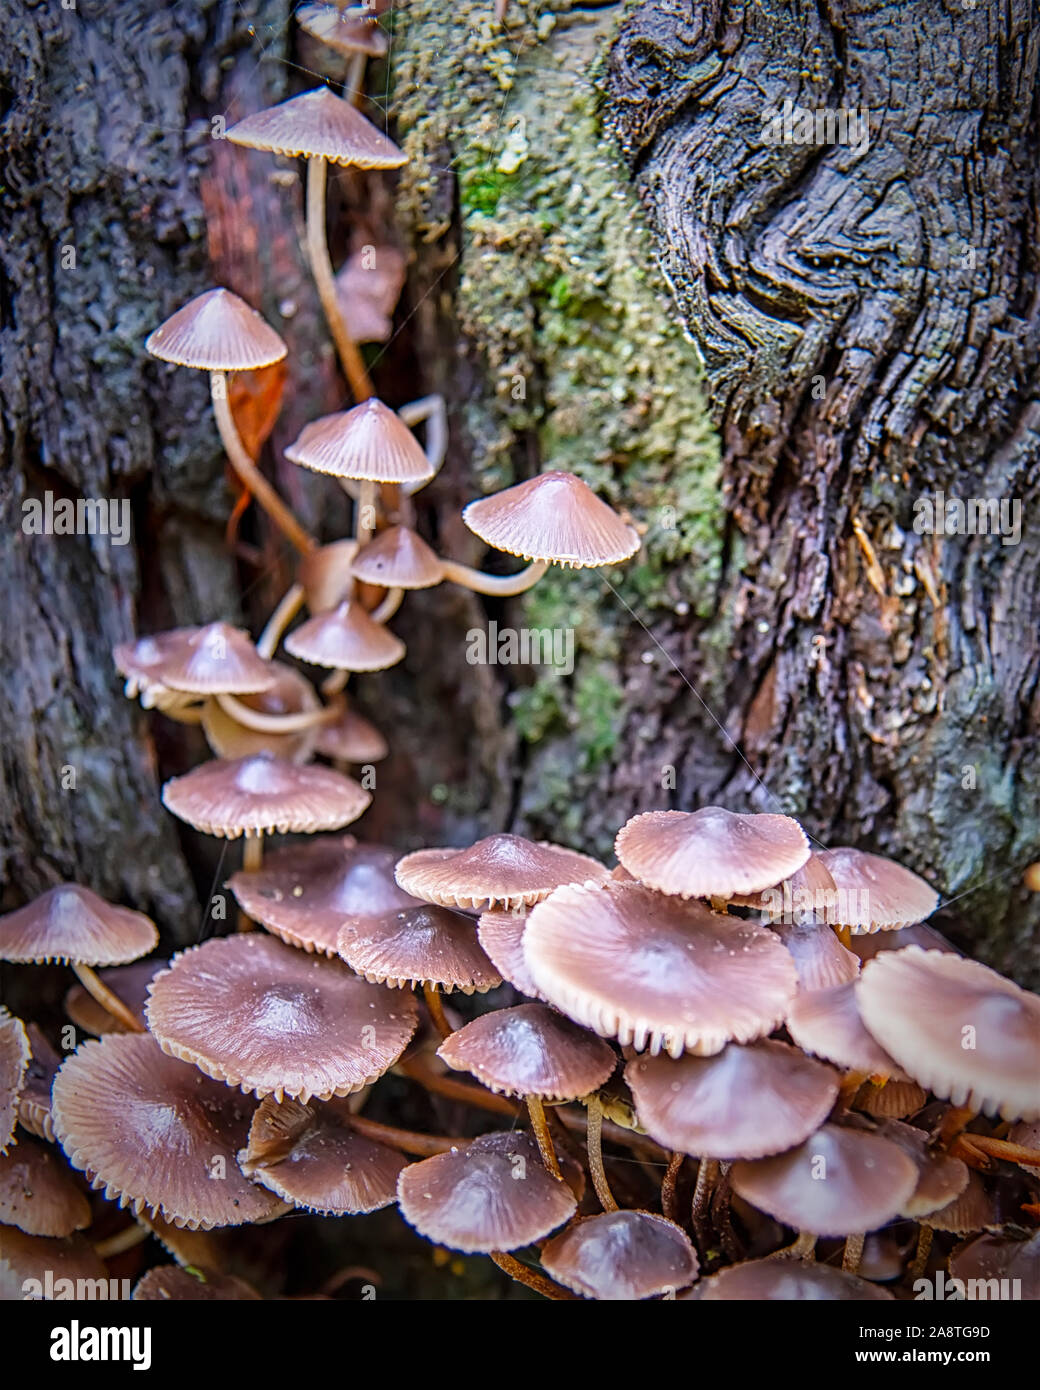 A cluster of mushrooms growing on a tree stump. Stock Photo